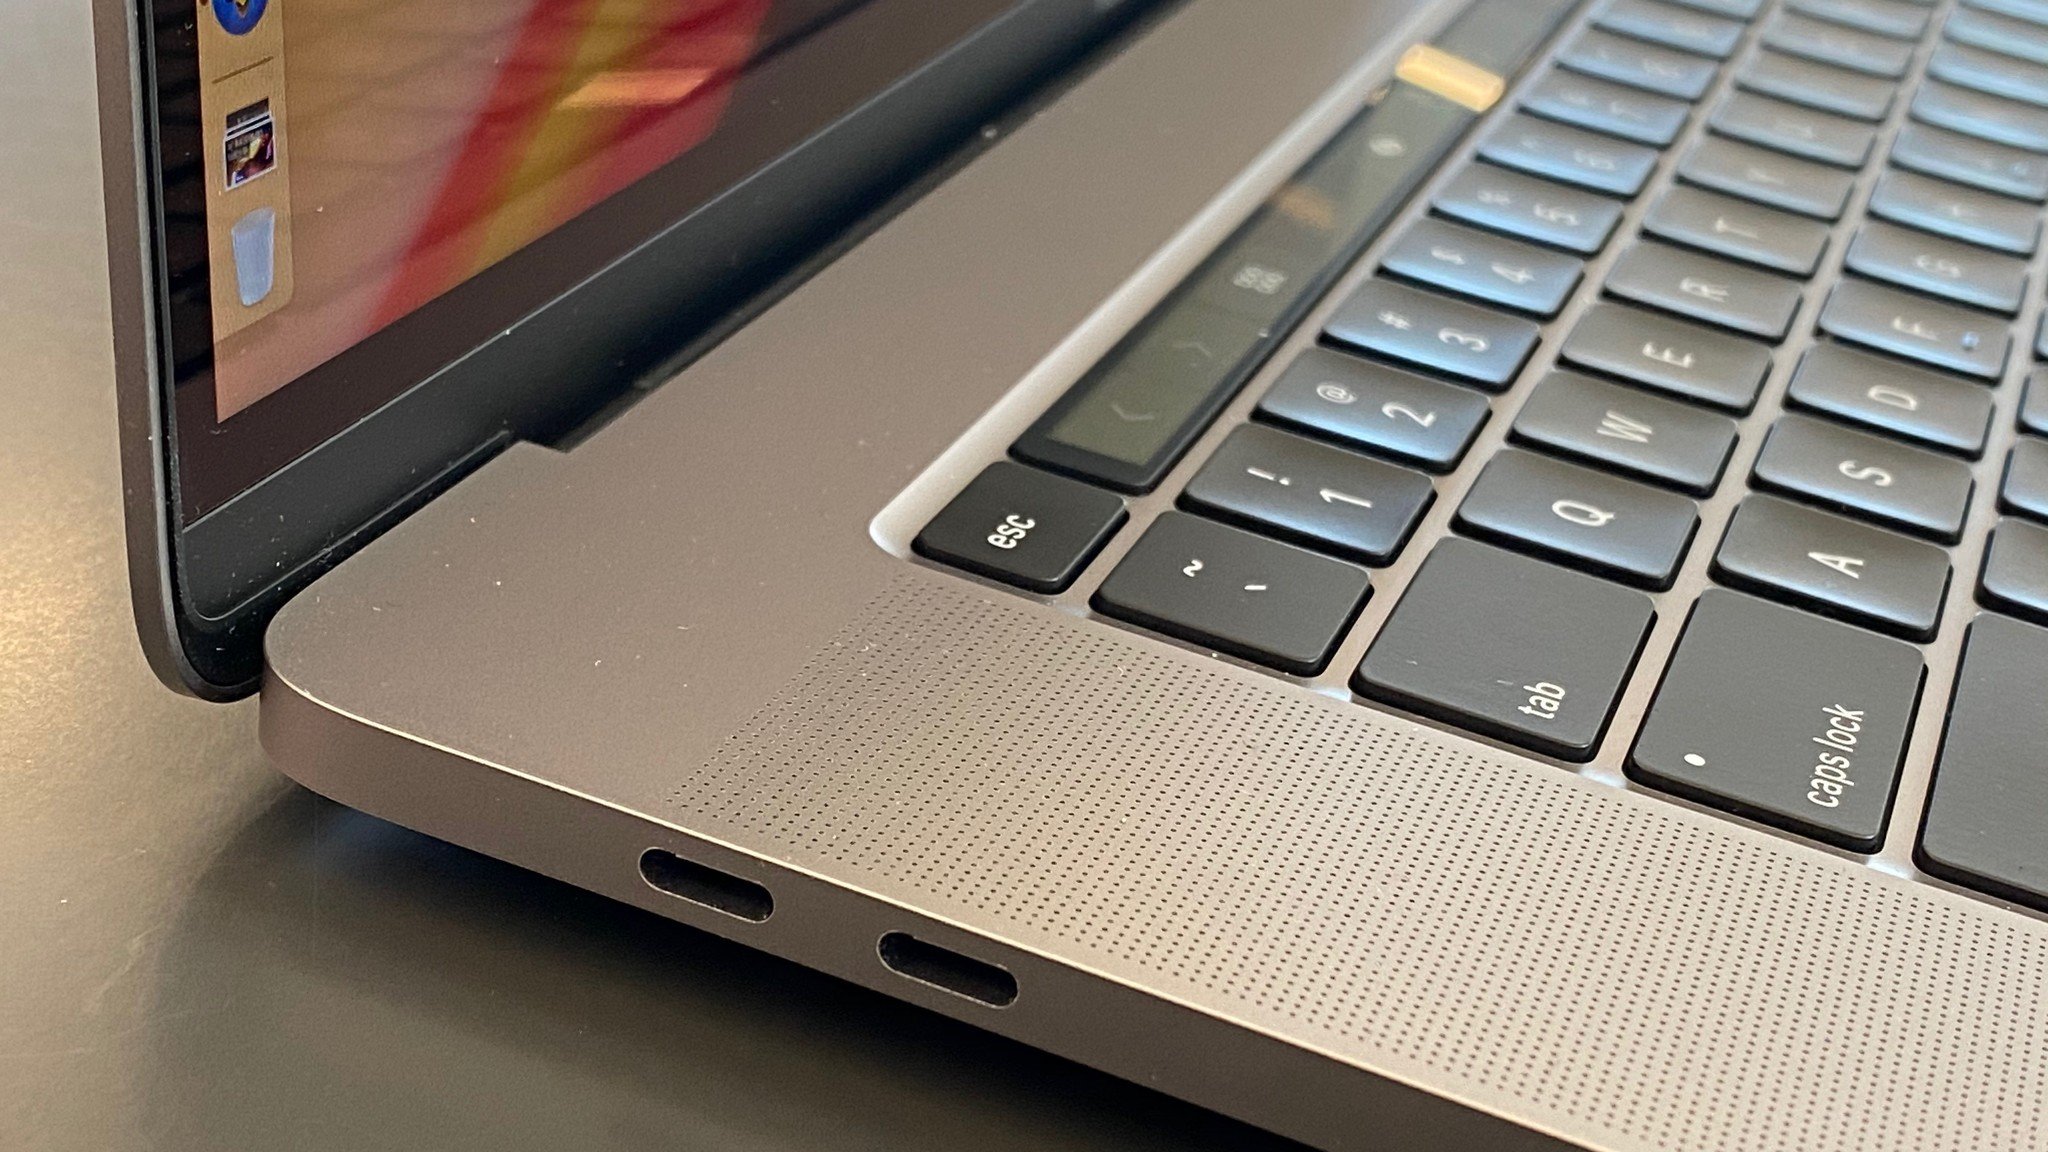  Macbook Pro Review: The Speakers.